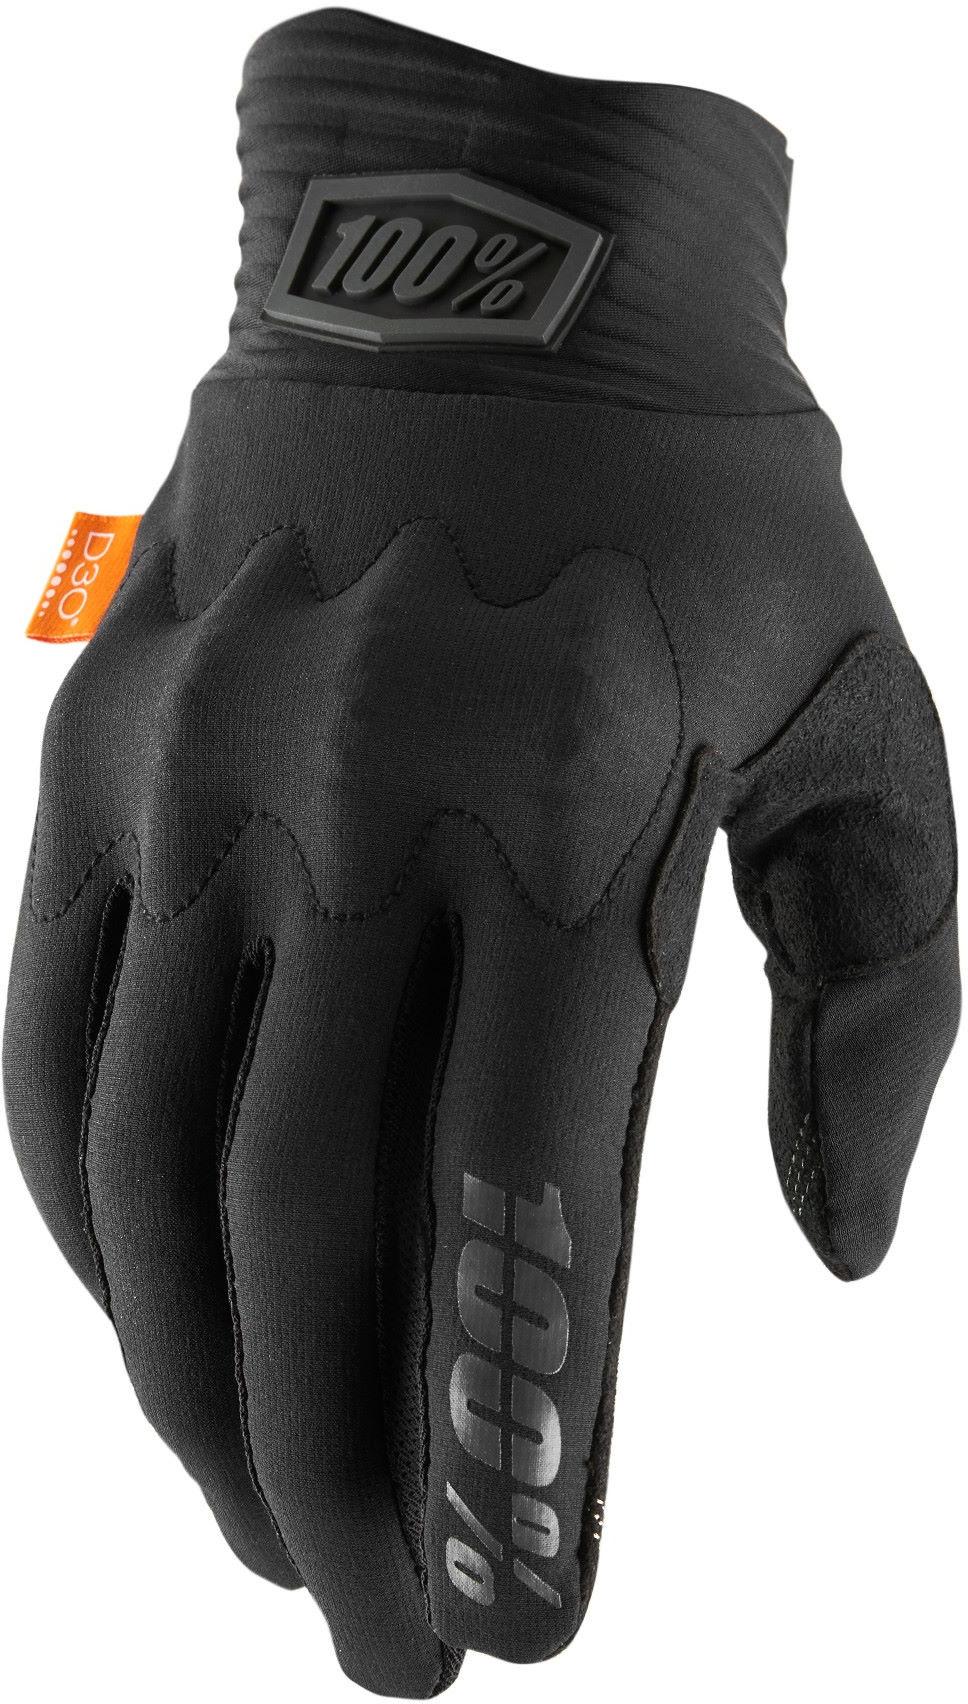 100% Cognito D30 Gloves  Black/charcoal